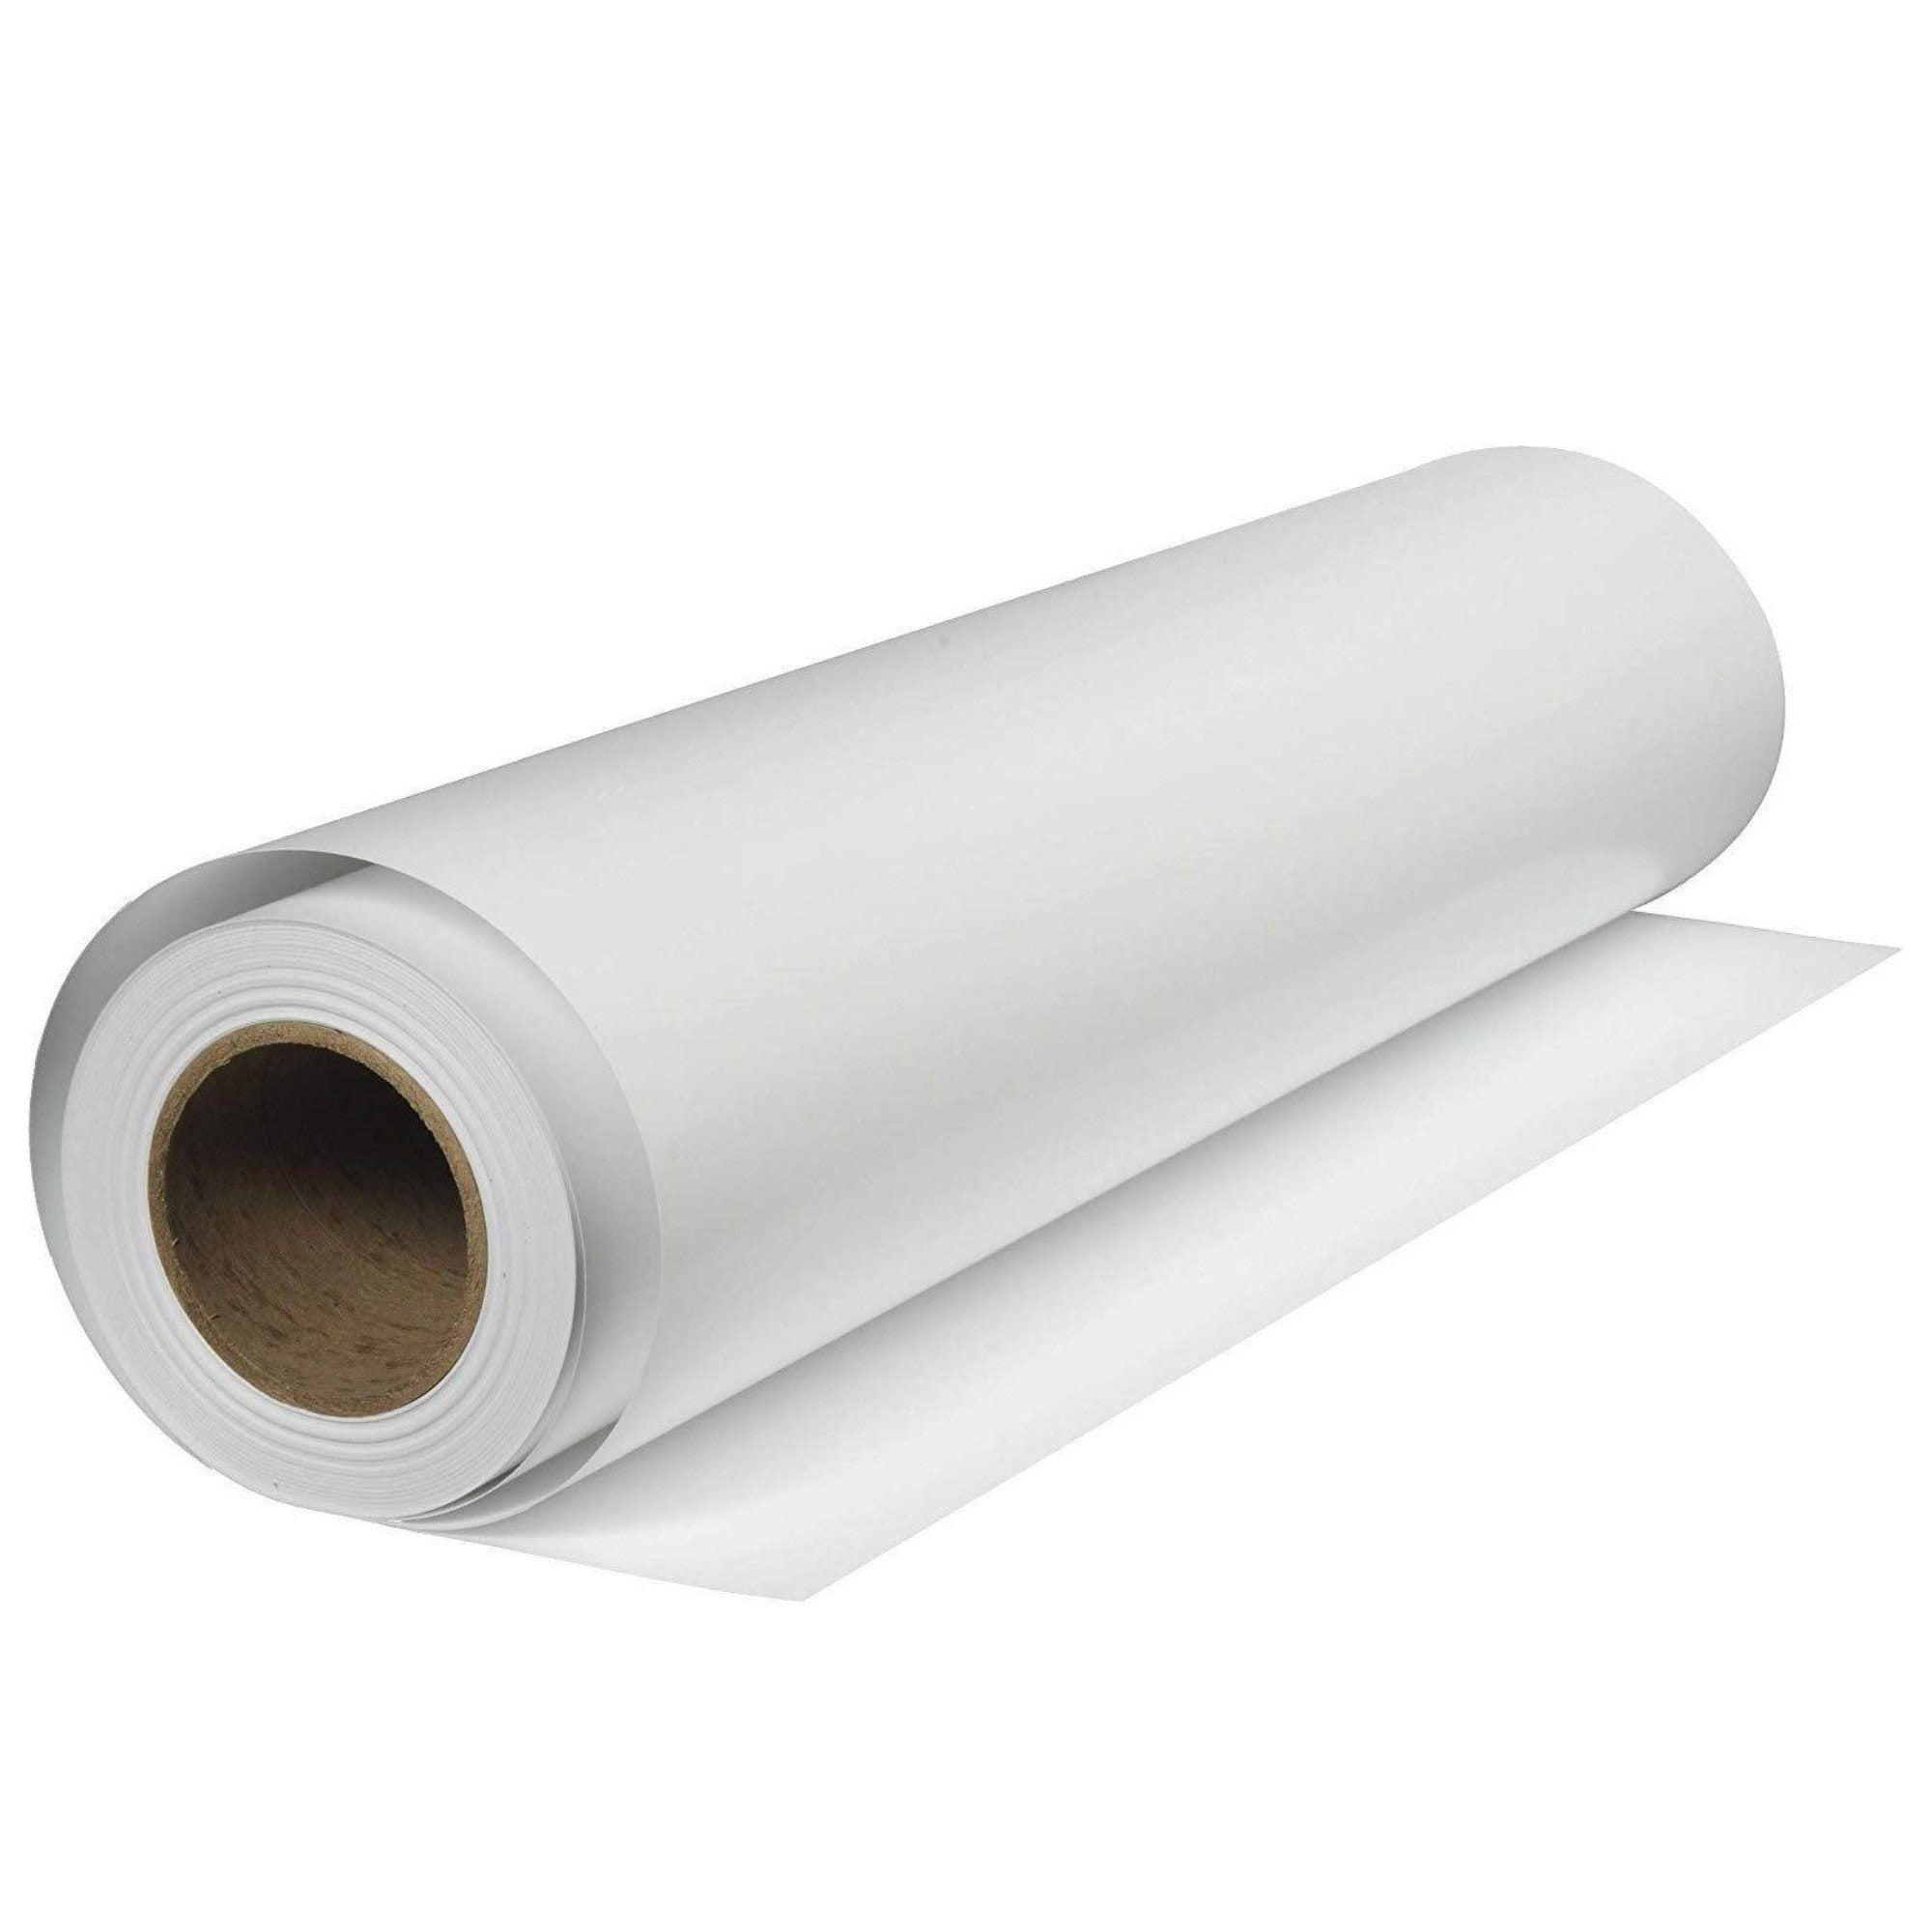 Pre-Masking Roll - Great for laser cutting - 300 ft.